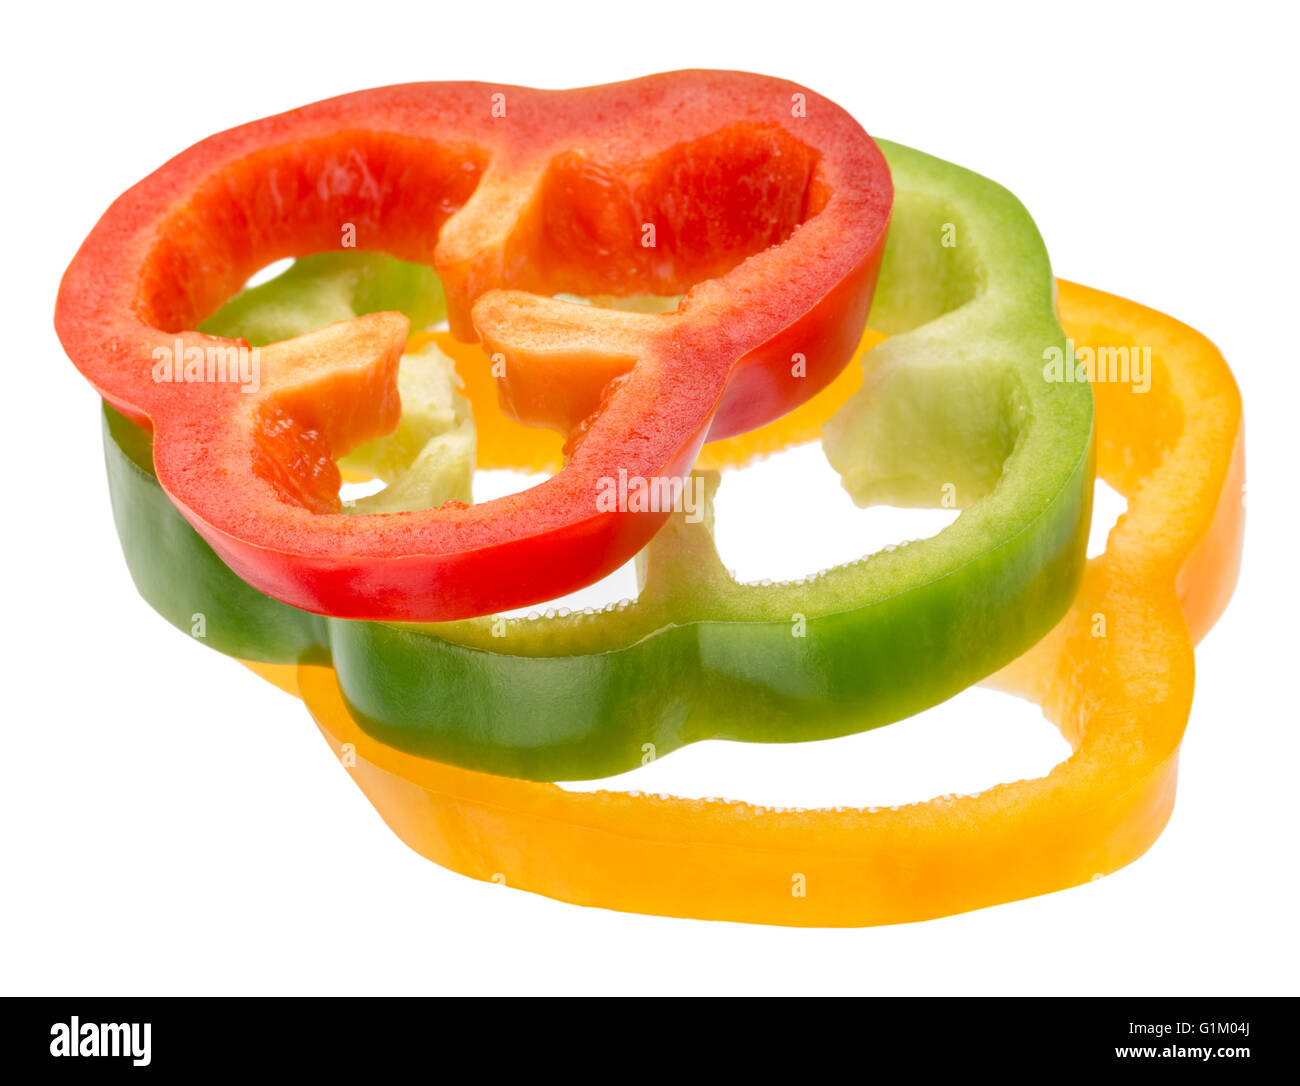 red, green and yellow pepper slices isolated on the white background. Stock Photo